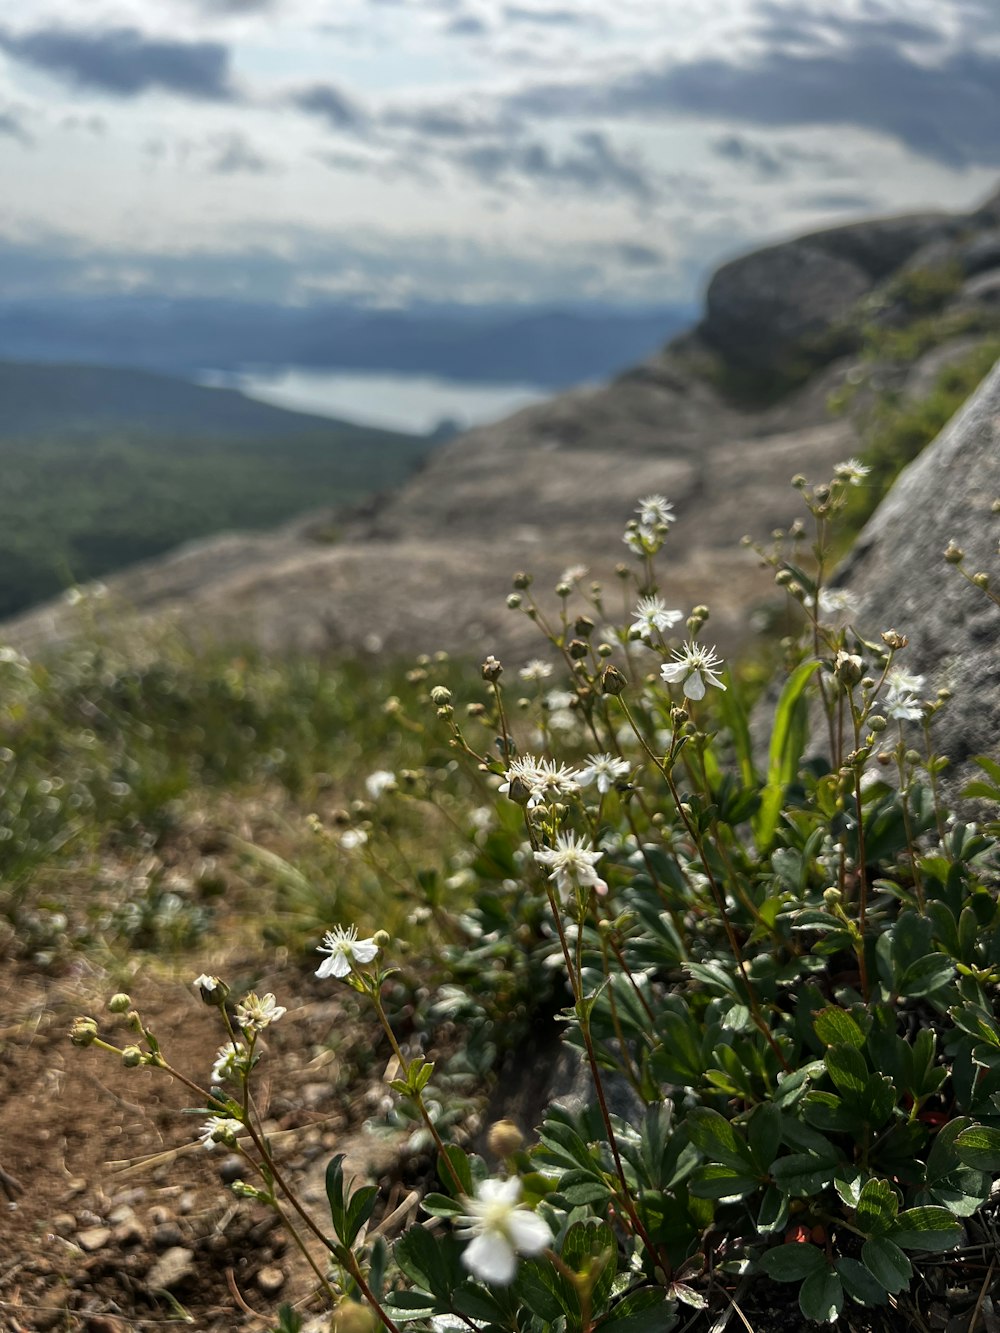 a plant with white flowers on a rocky hillside